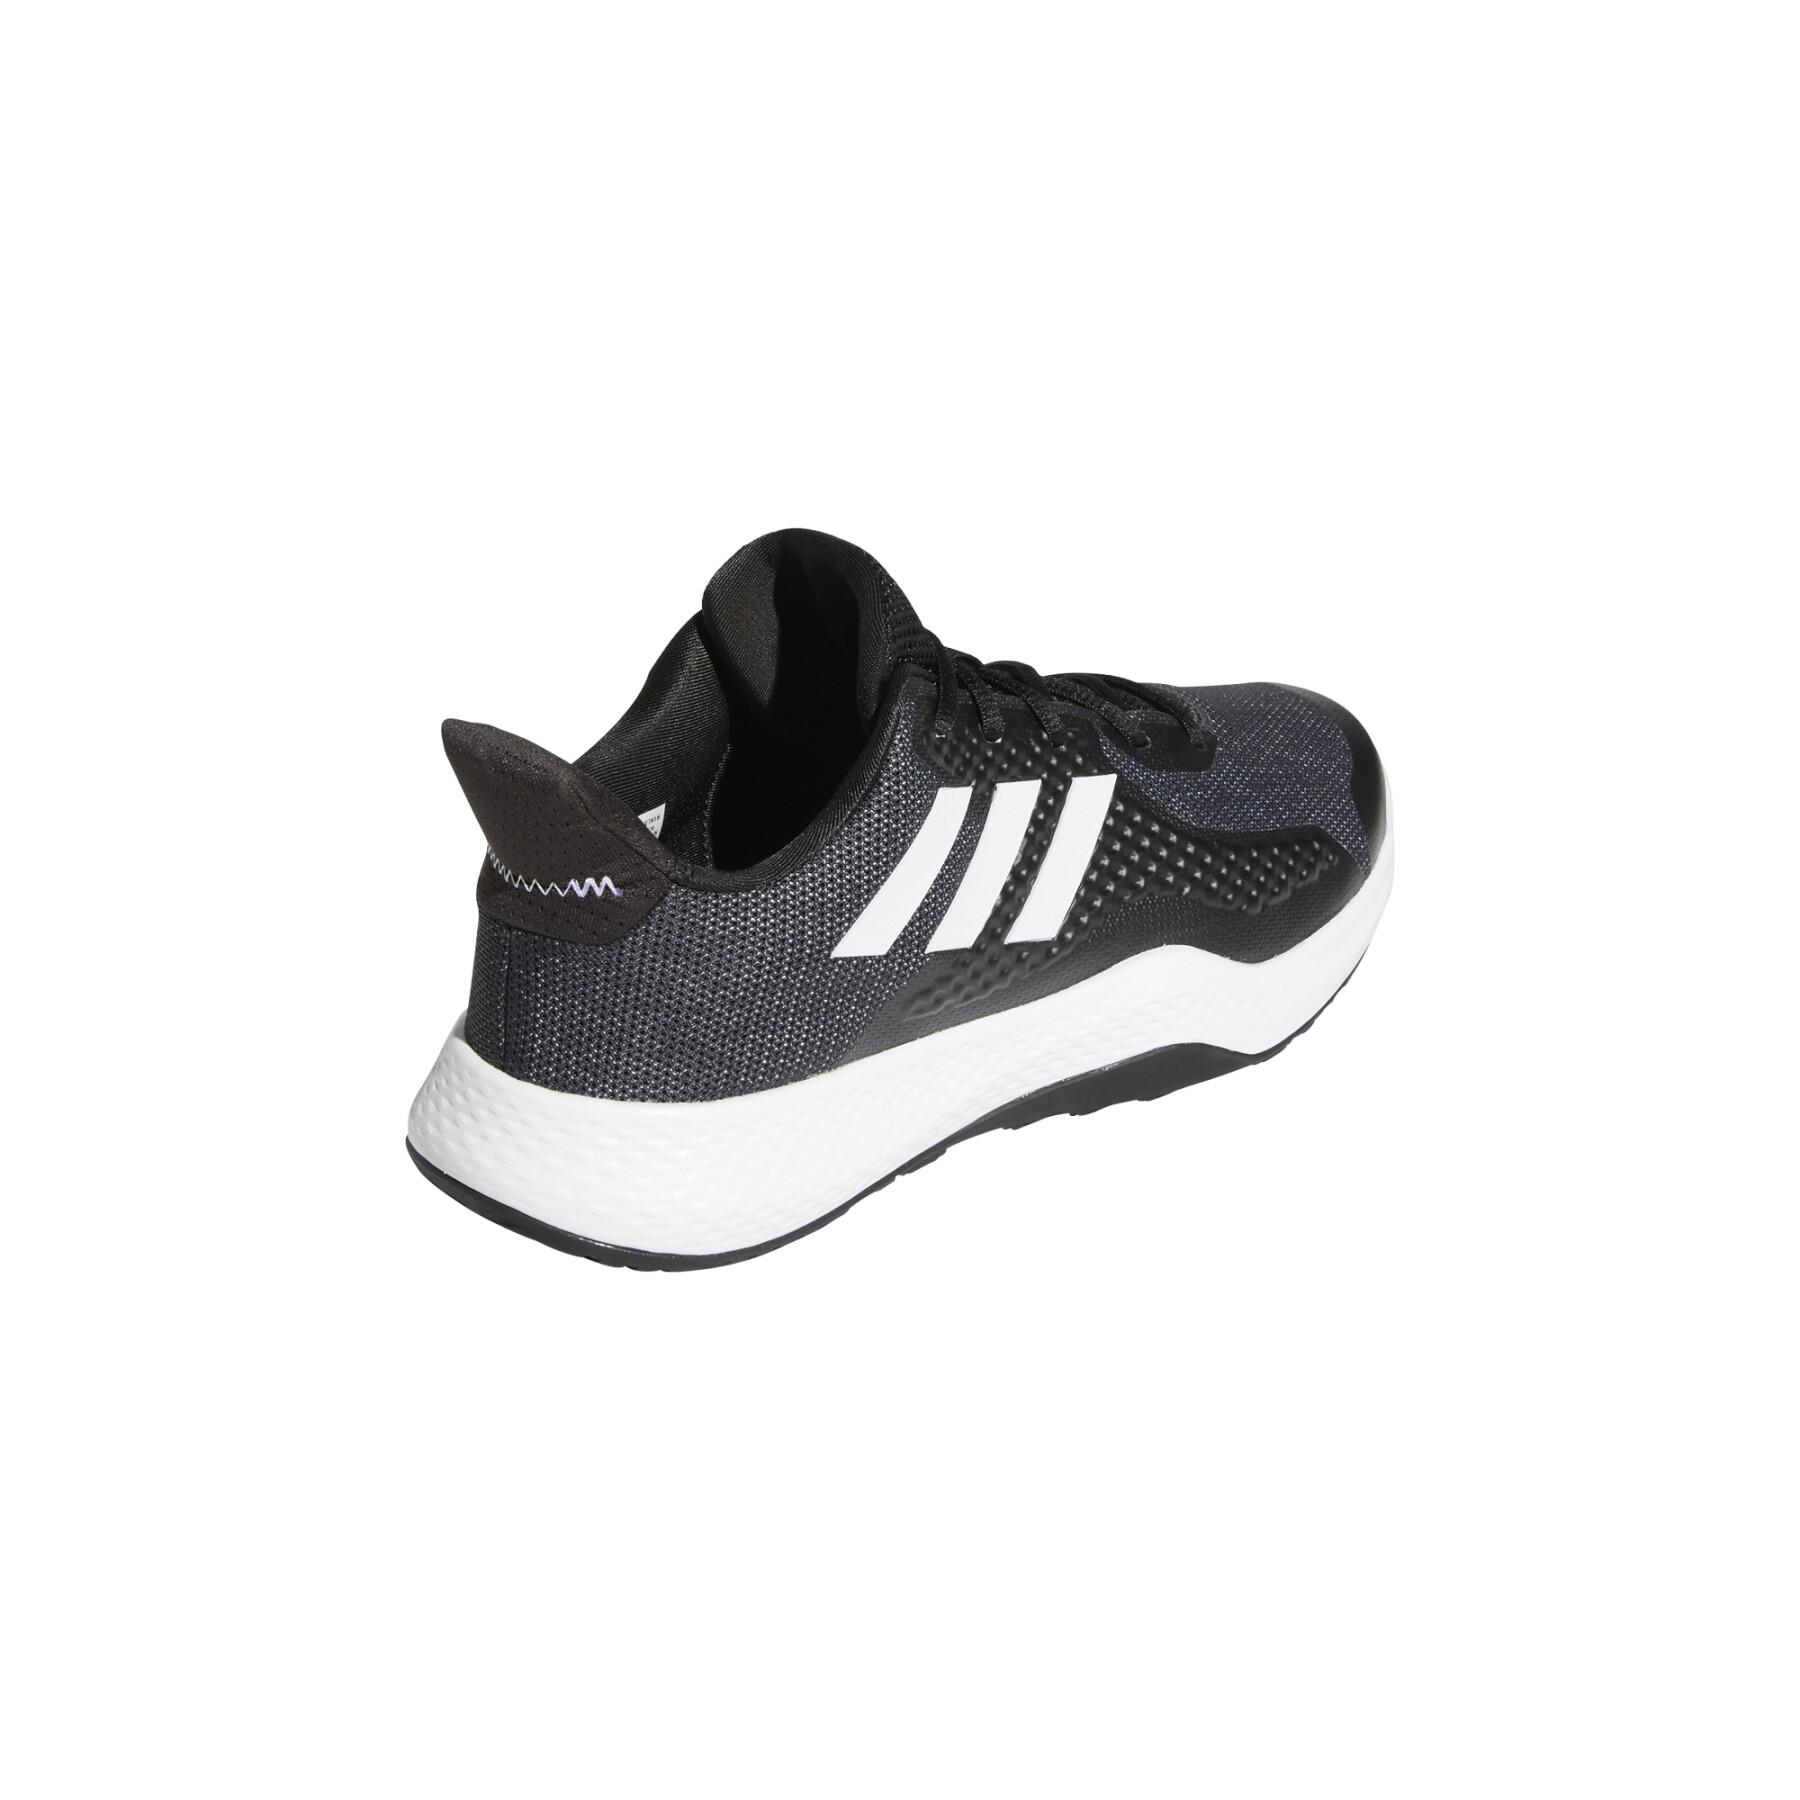 Chaussures adidas FitBounce Trainers